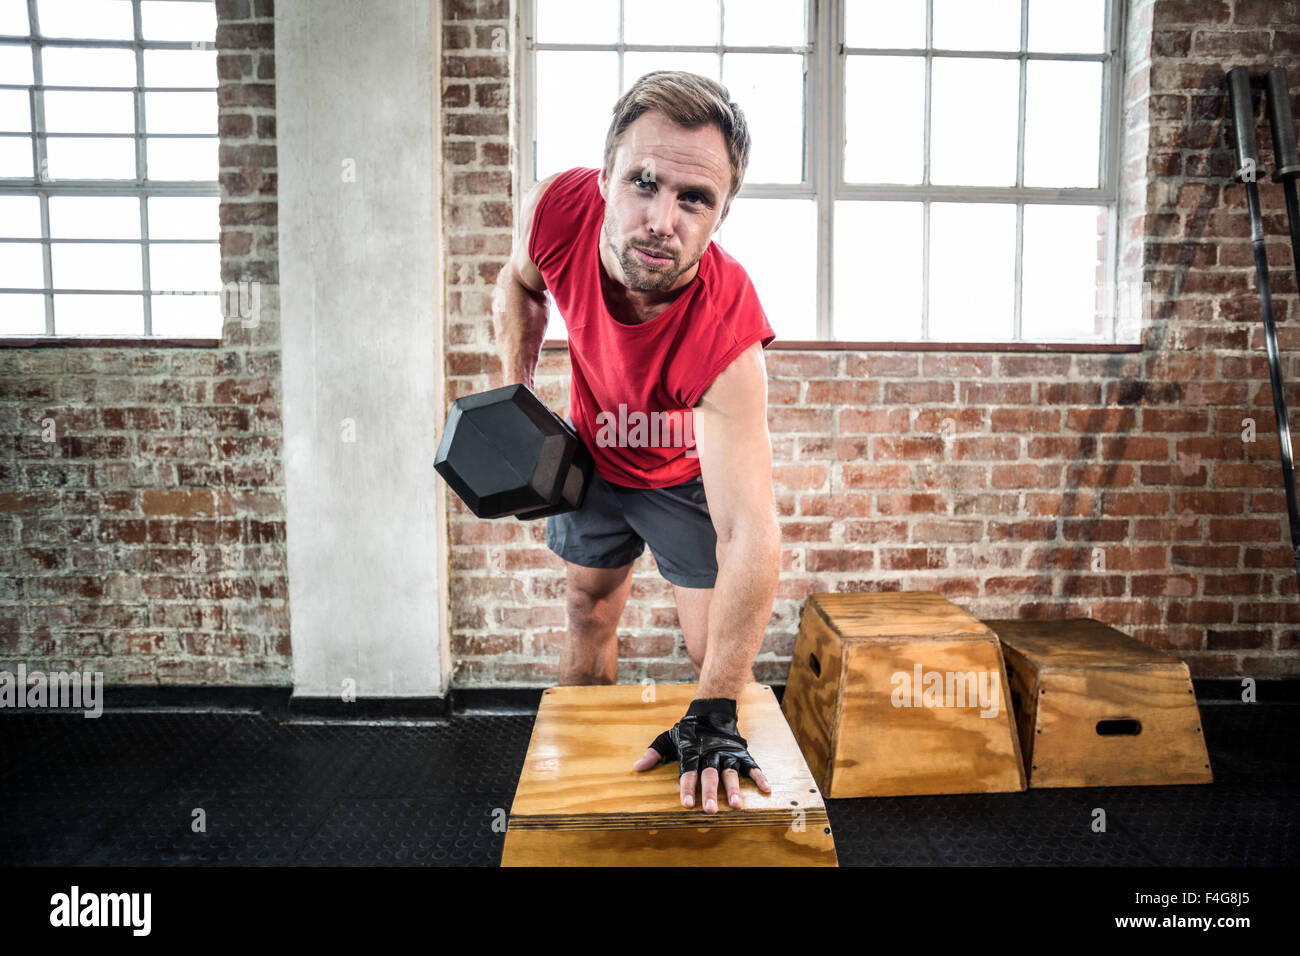 Muscular man lifting dumbbell lean on a box Stock Photo